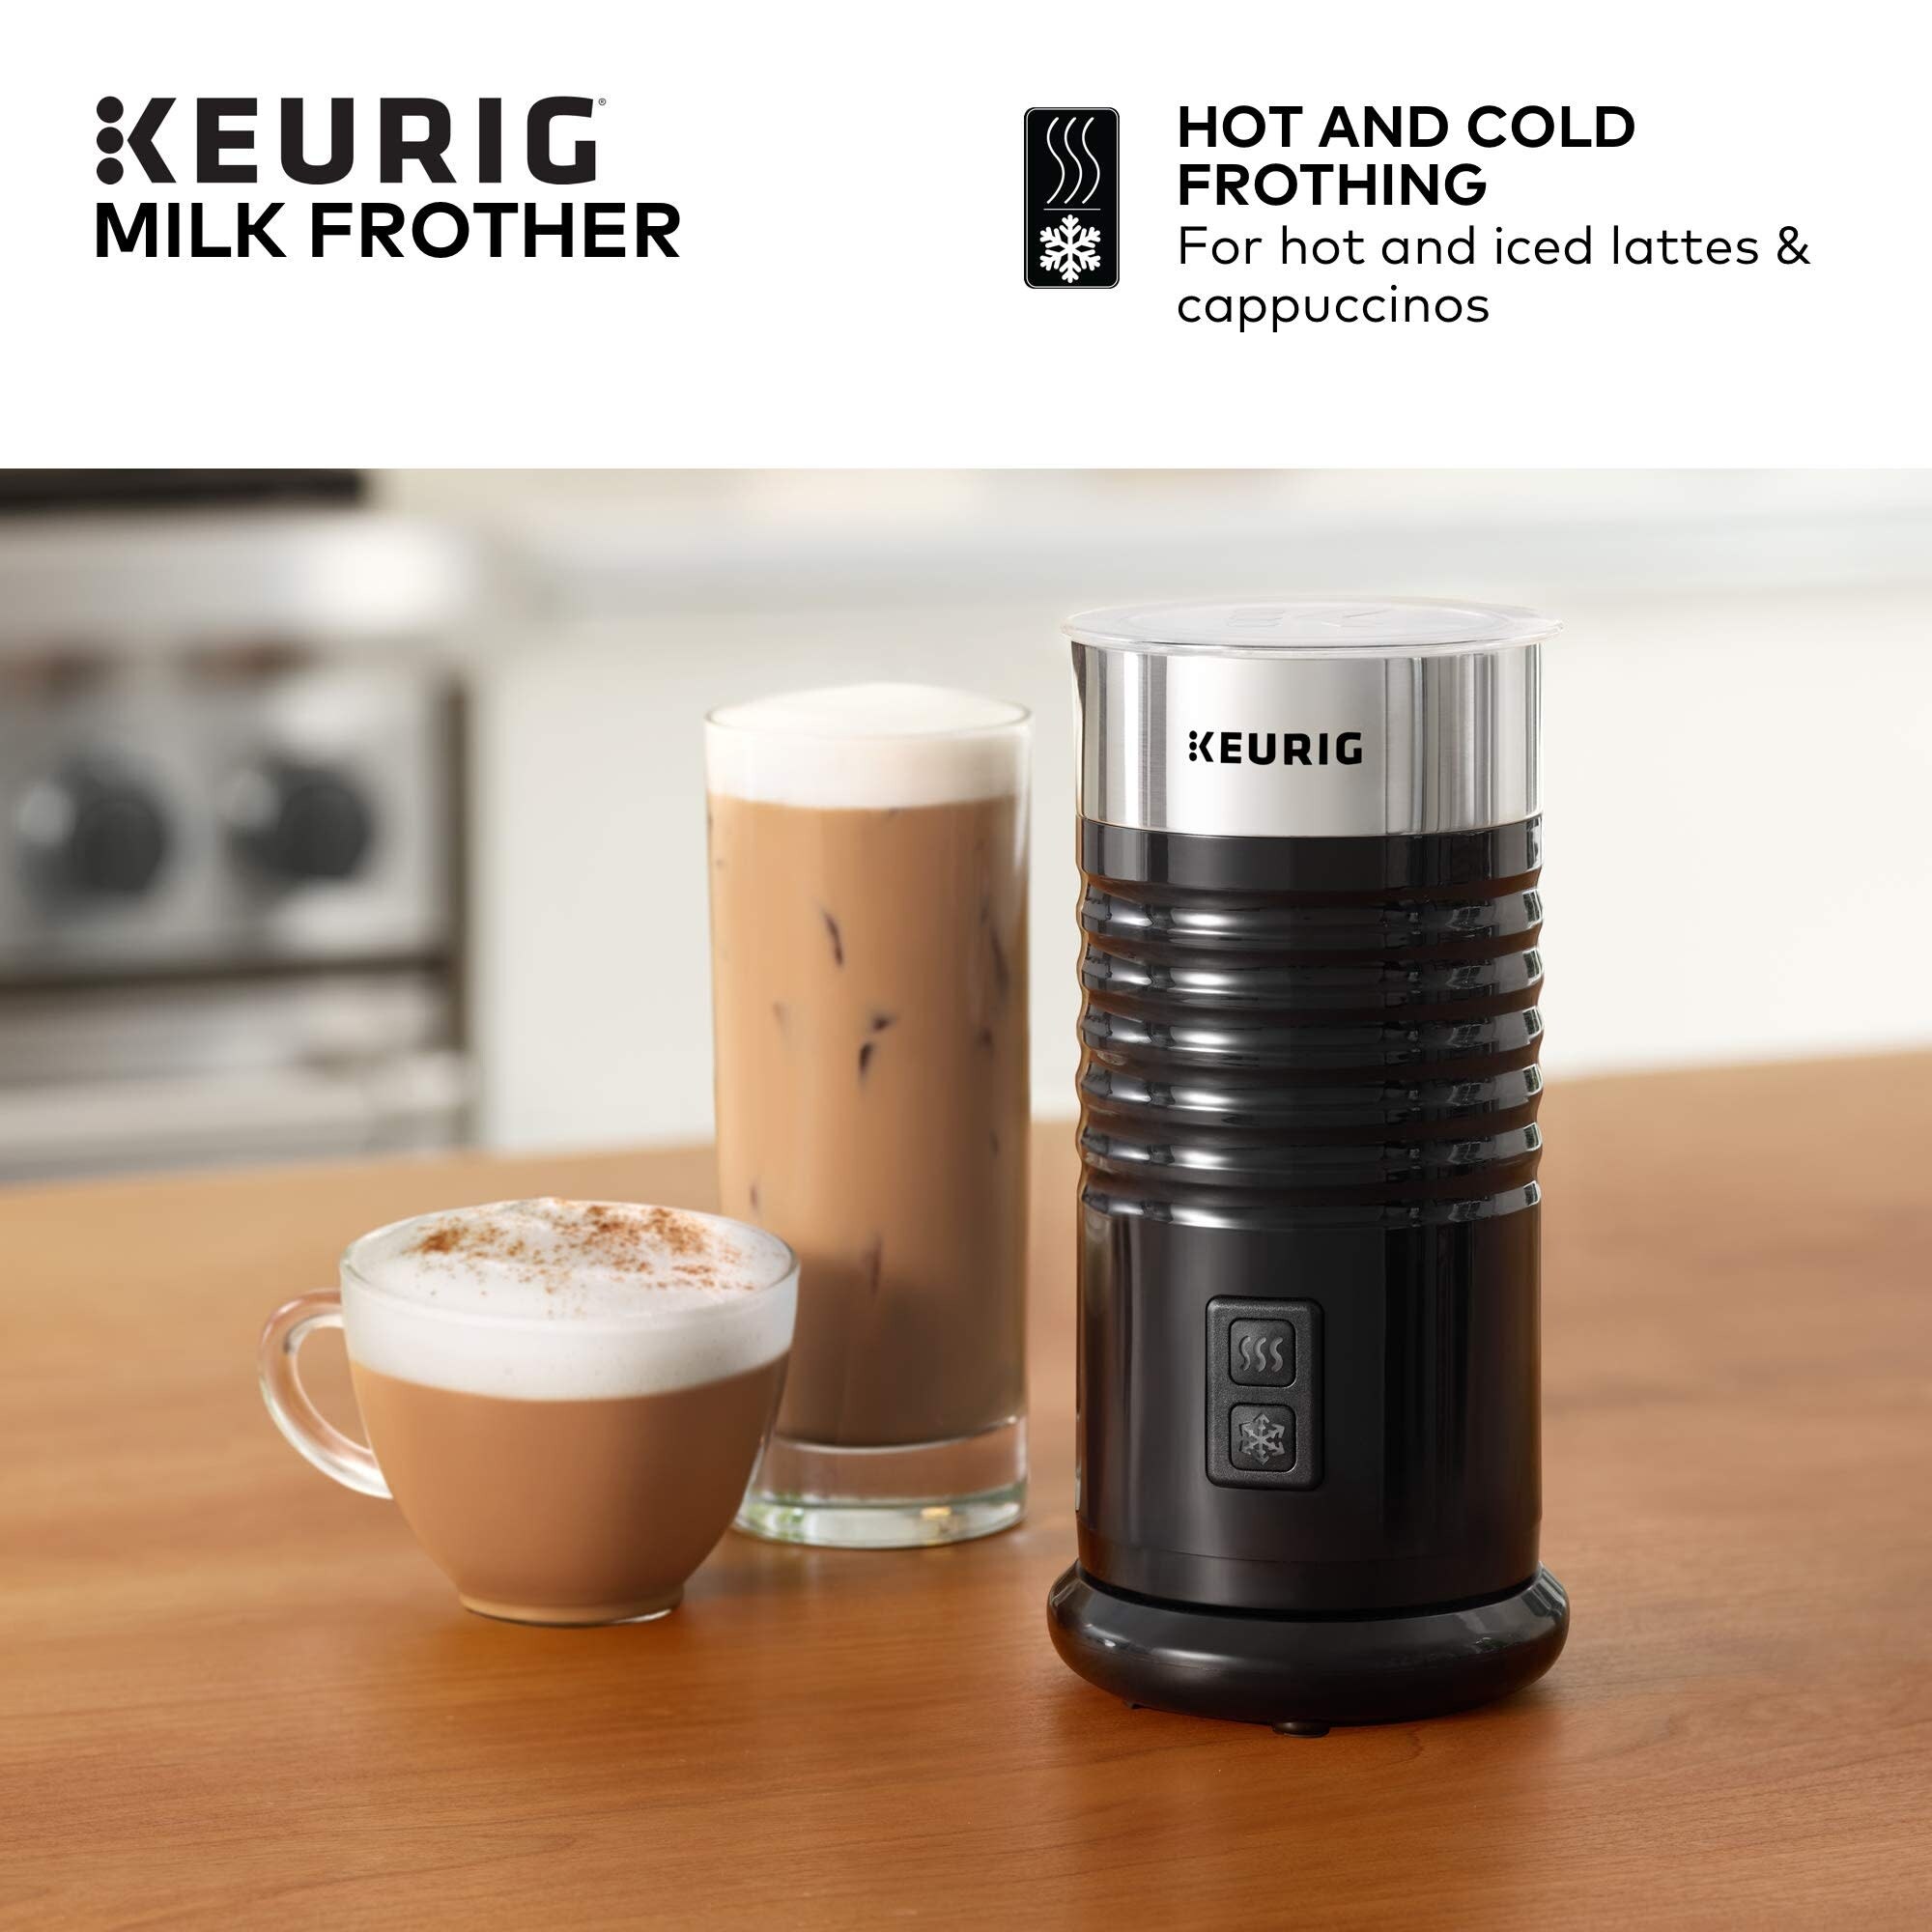 https://ak1.ostkcdn.com/images/products/is/images/direct/01269f93565afcb33894ee7368057a404a93bc53/Keurig-Standalone-Milk-Frother-for-Hot-and-Iced-Beverages.jpg